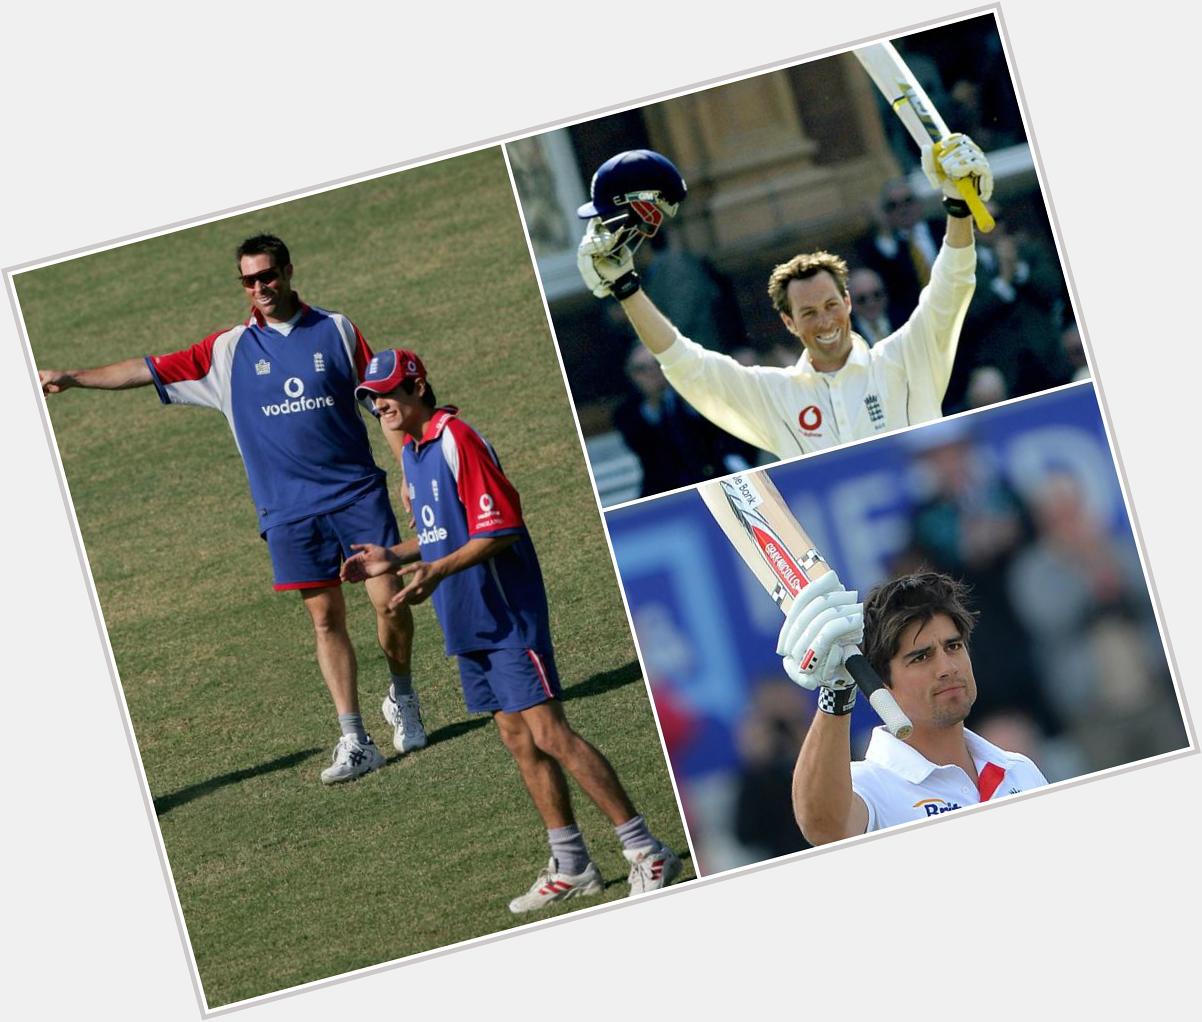 Happy Birthday to 2 of finest modern day Test openers, and Alastair Cook! 